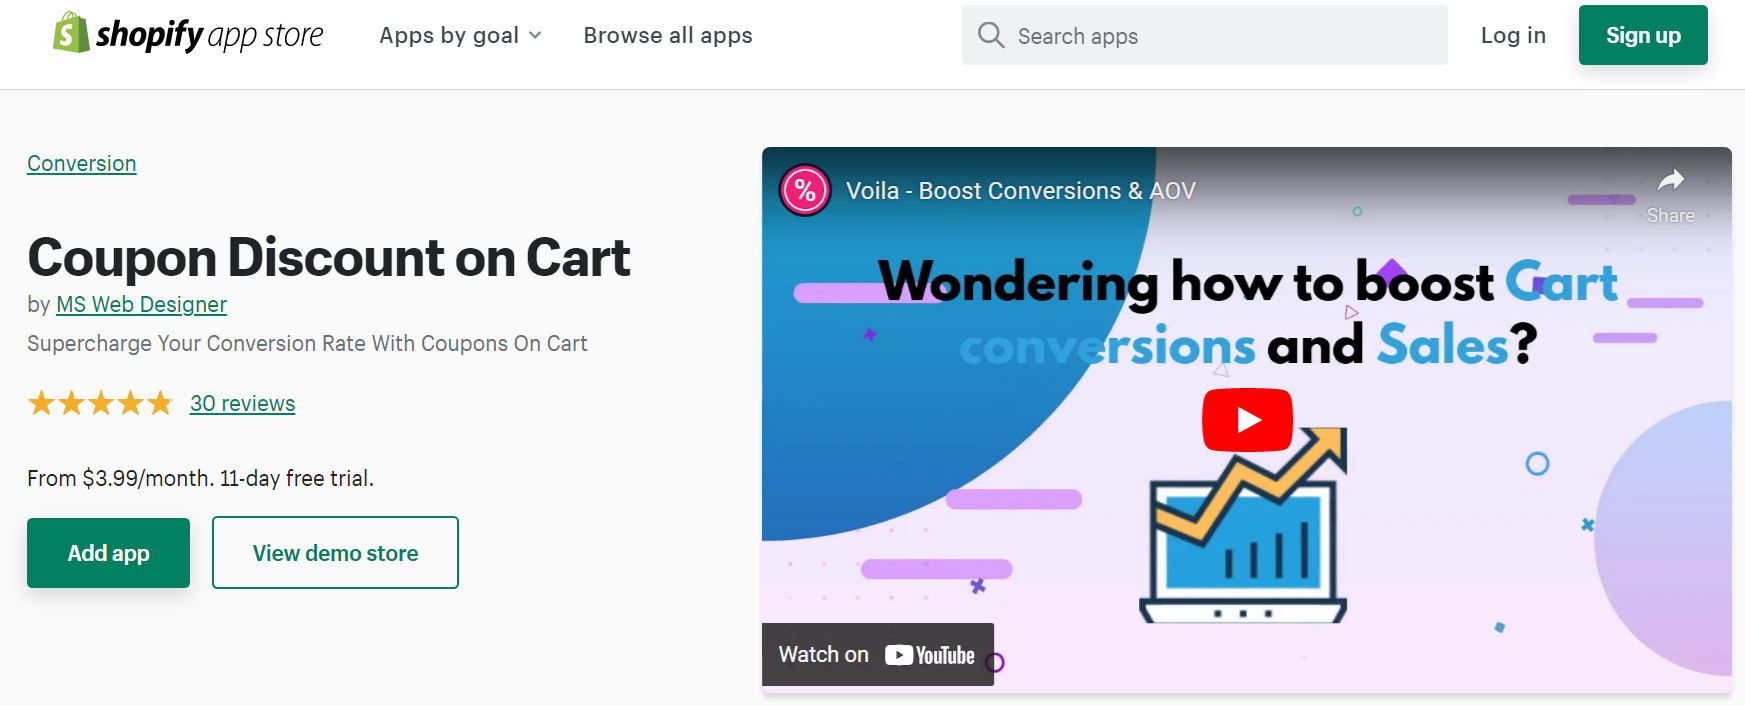 Coupon Discount on Cart by MS Web Designer